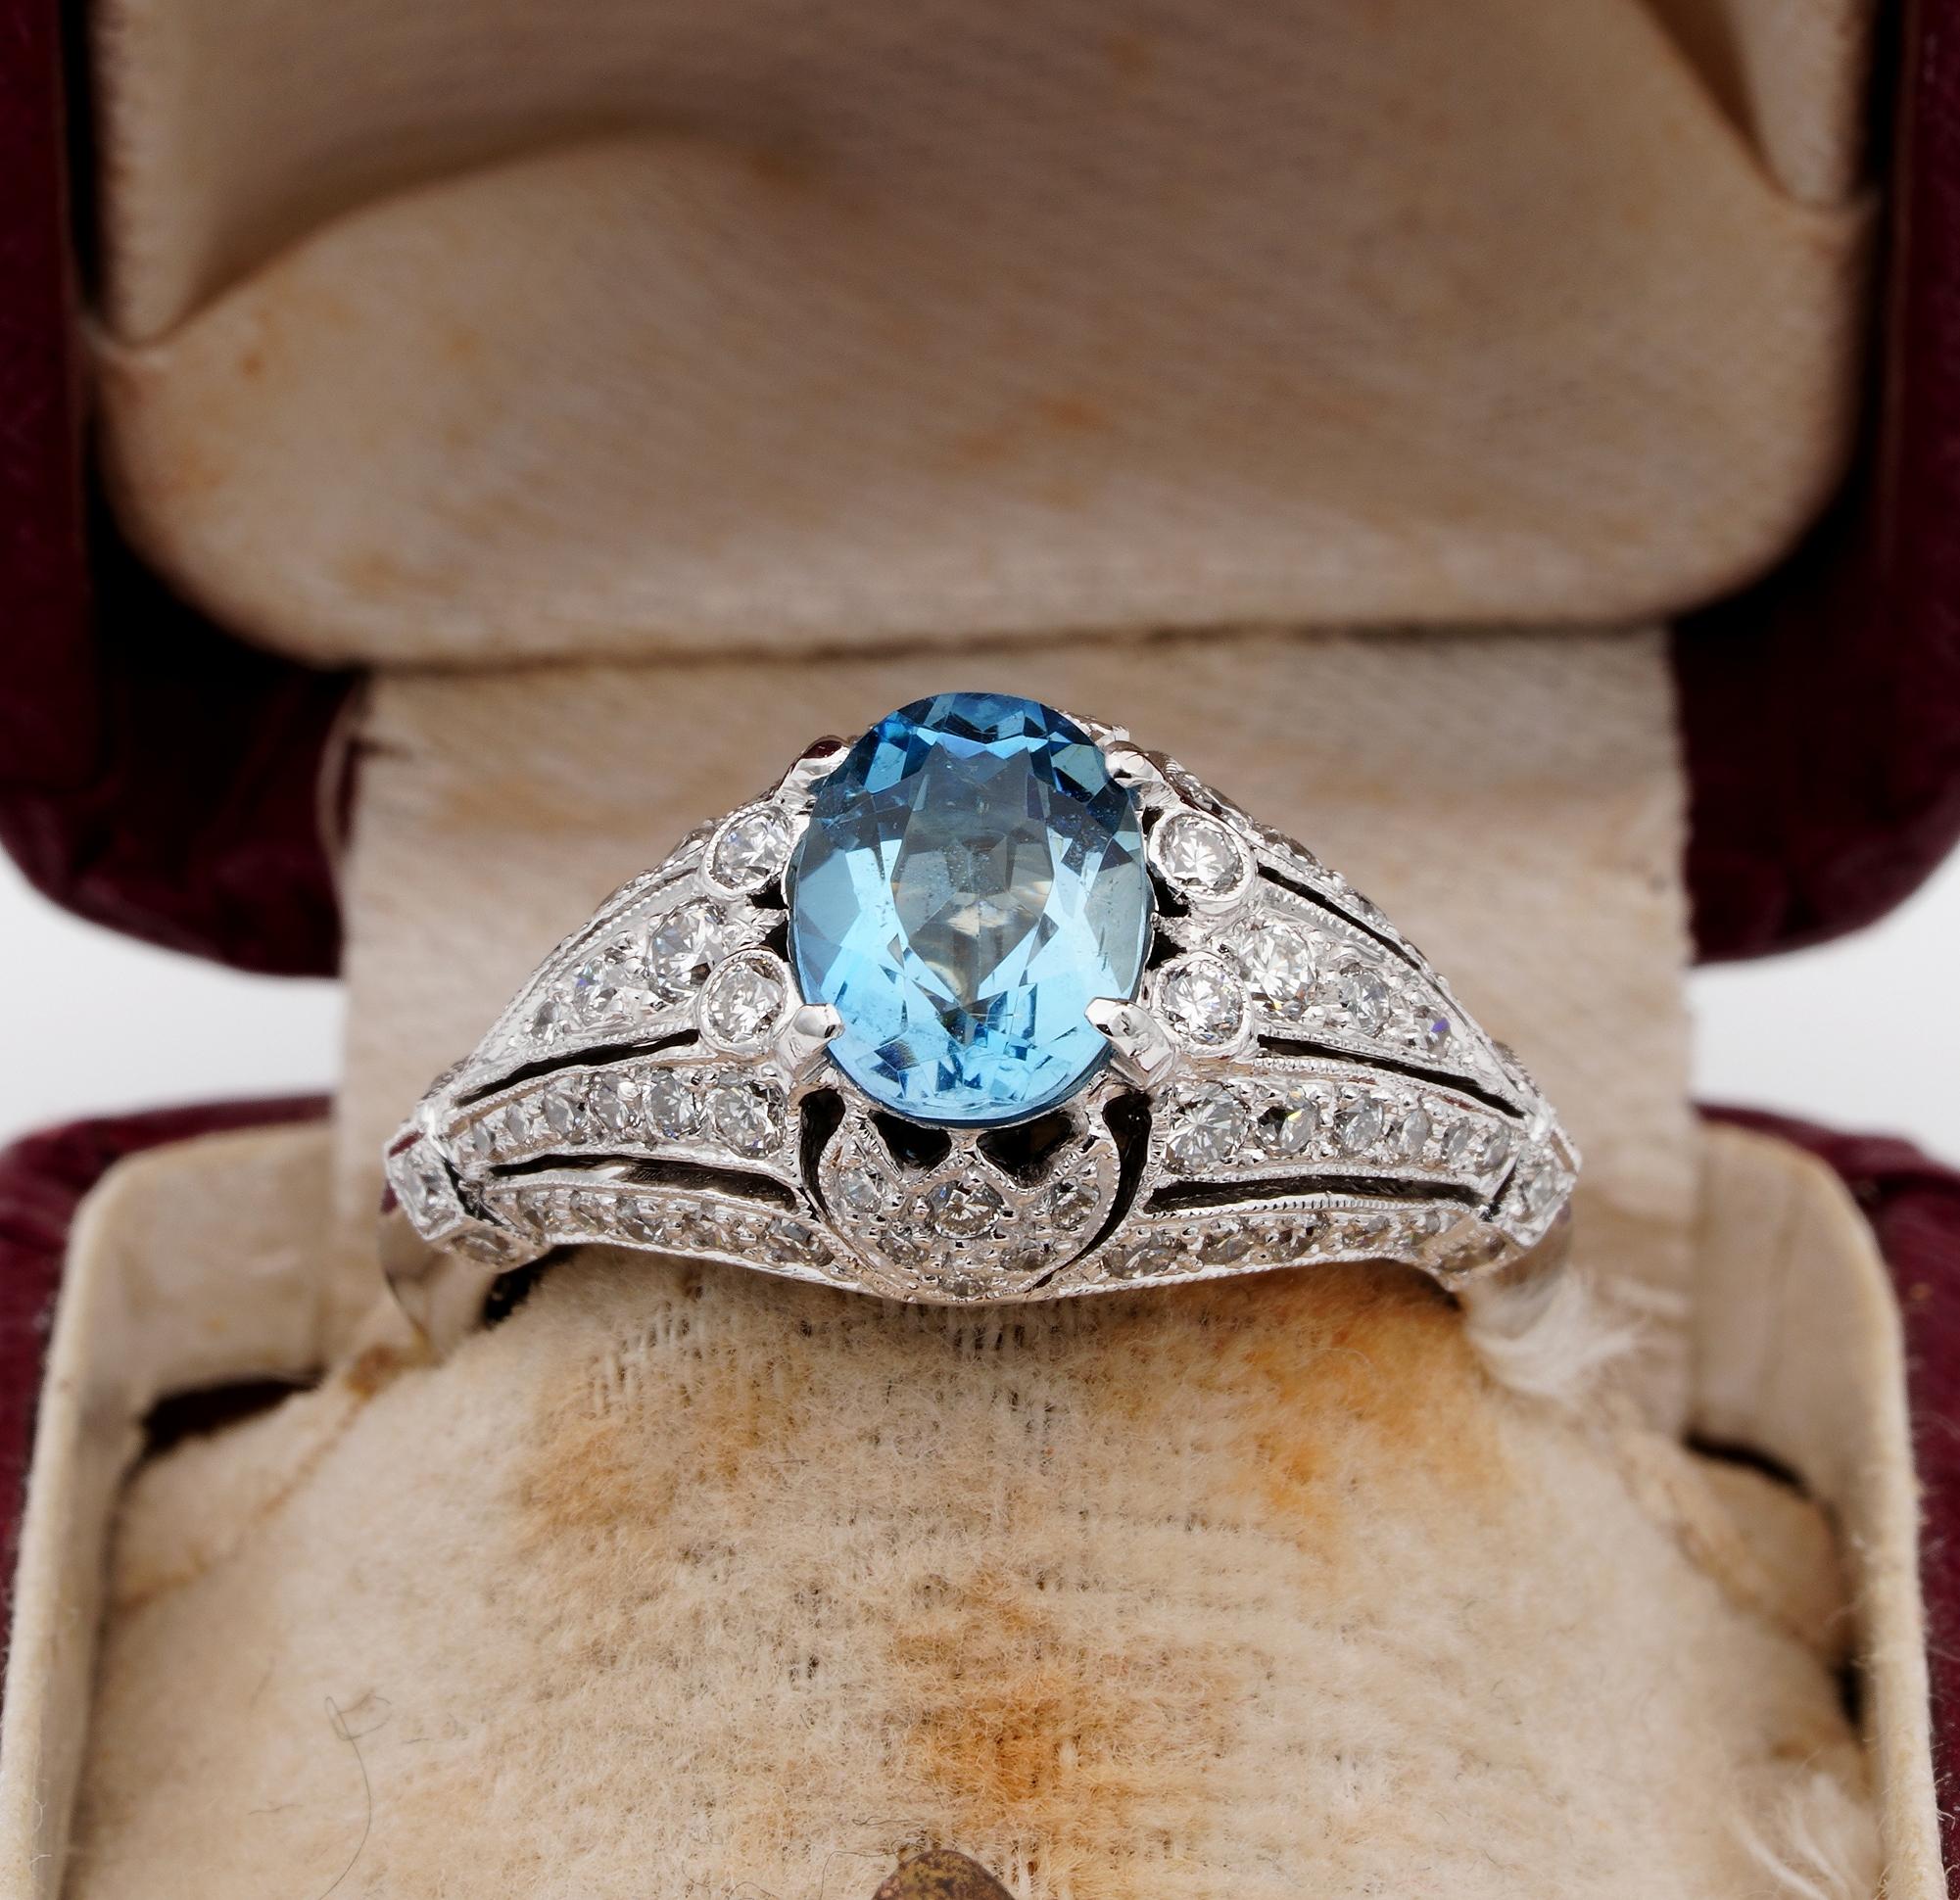 This fantastic Art Deco Style Aquamarine & Diamond ring is mid - century ca.
Prizing an exquisite workmanship hand executed of solid 18 KT gold,
Designed in an unique Art Deco style with a sturdy mount displaying lots of sparkle and glow
Centrally